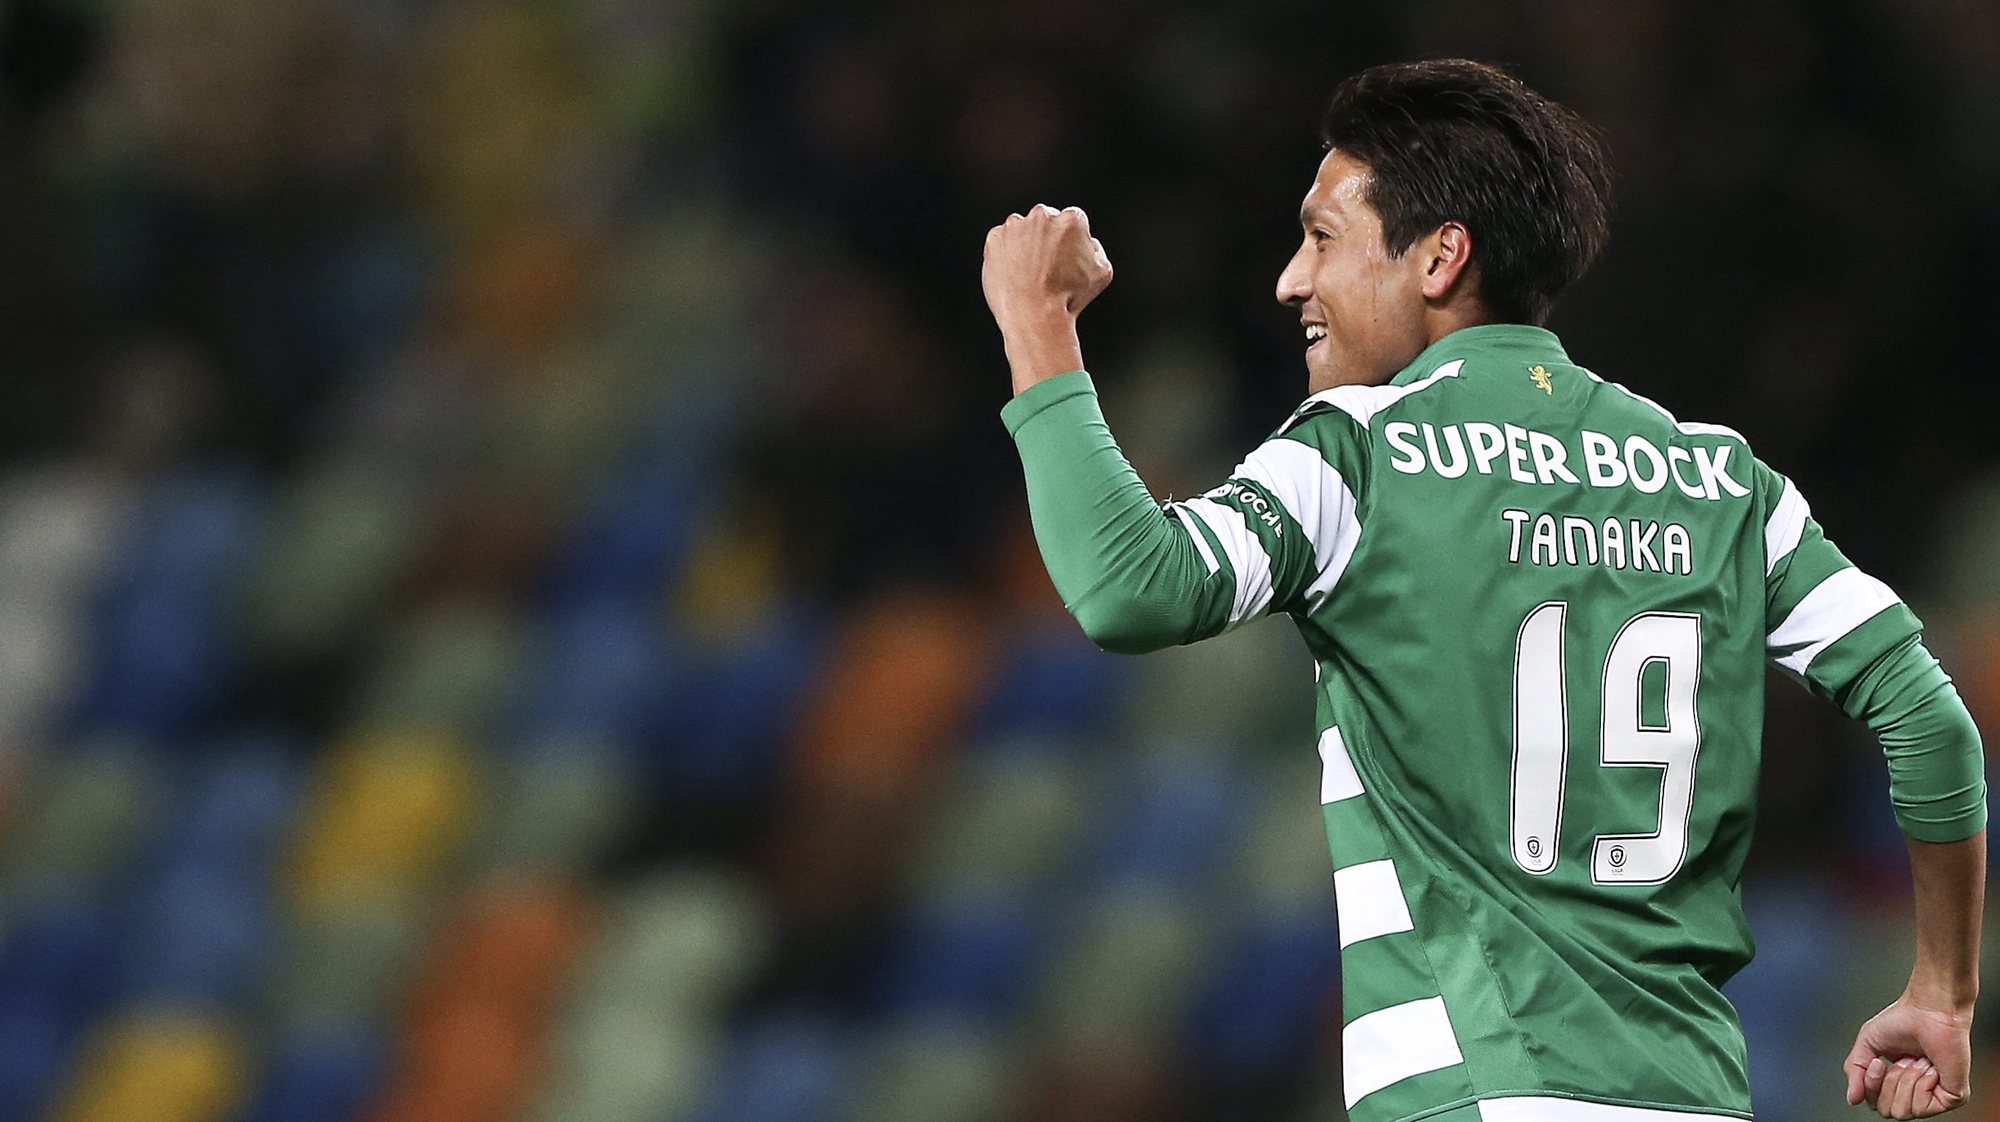 epa04567633 Sporting&#039;s Japanese player Junya Tanaka celebrates after scoring against Rio Ave during thE Portuguese First League soccer match between Sporting Lisbon and Rio Ave at the Jose Alvalade Stadium, in Lisbon, Portugal, 18 January 2015.  EPA/TIAGO PETINGA